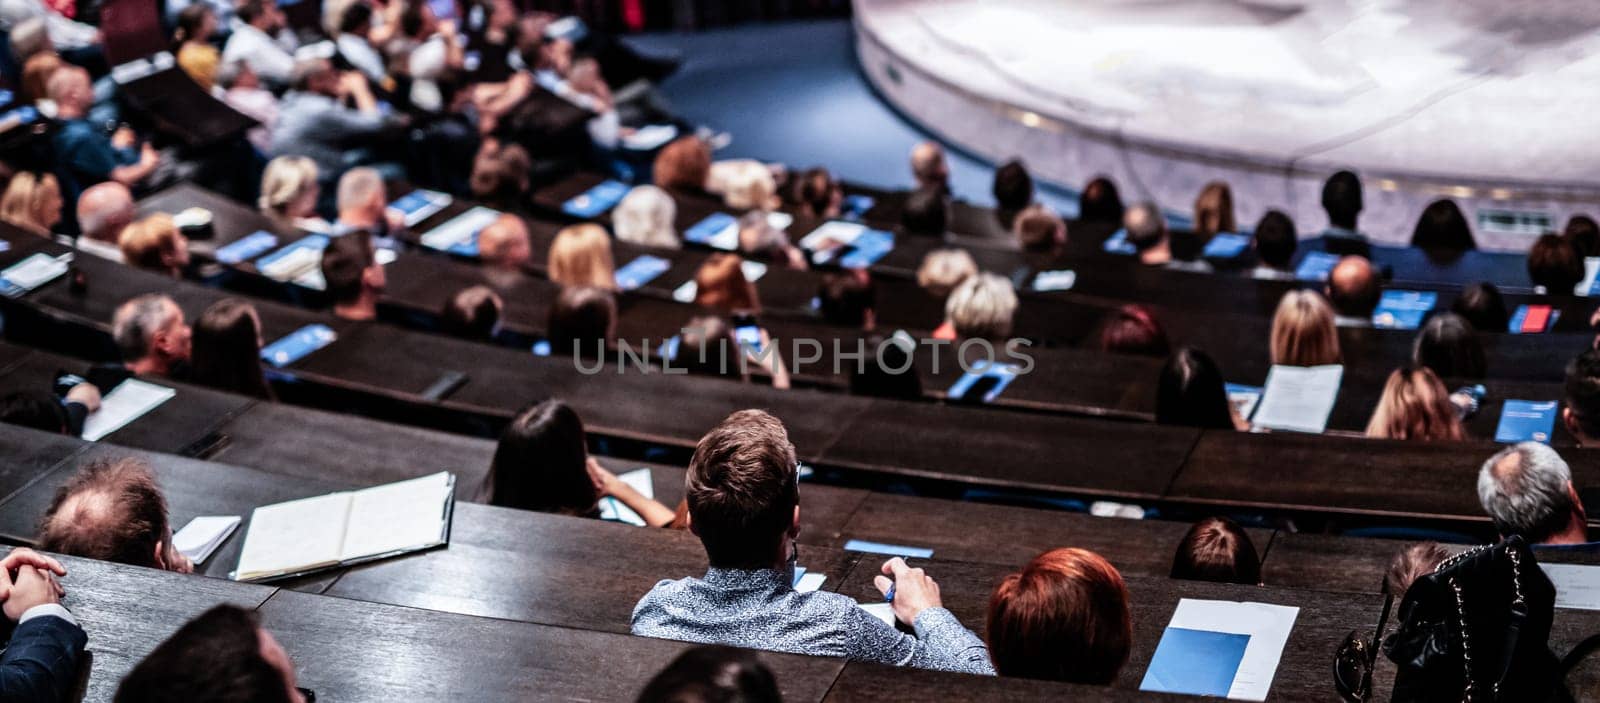 Business and entrepreneurship symposium. Audience in conference hall. Rear view of unrecognized participant in audience. by kasto